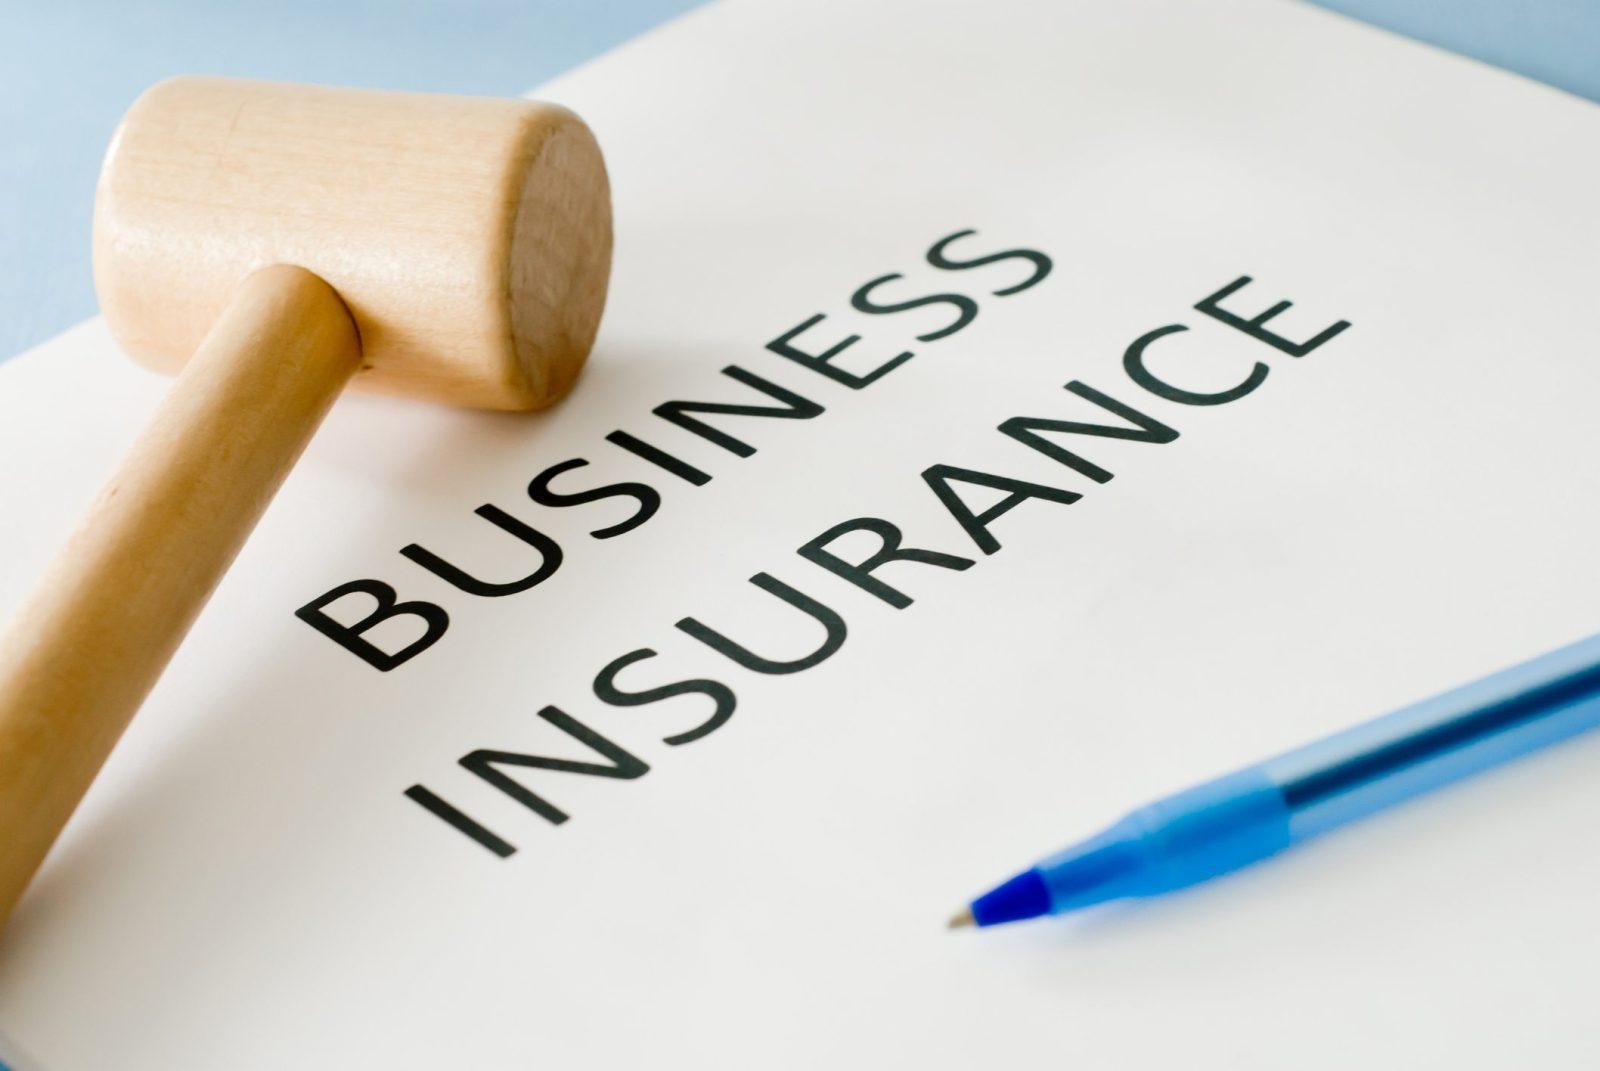 Why business need insurance coverage for protection against risk and damage